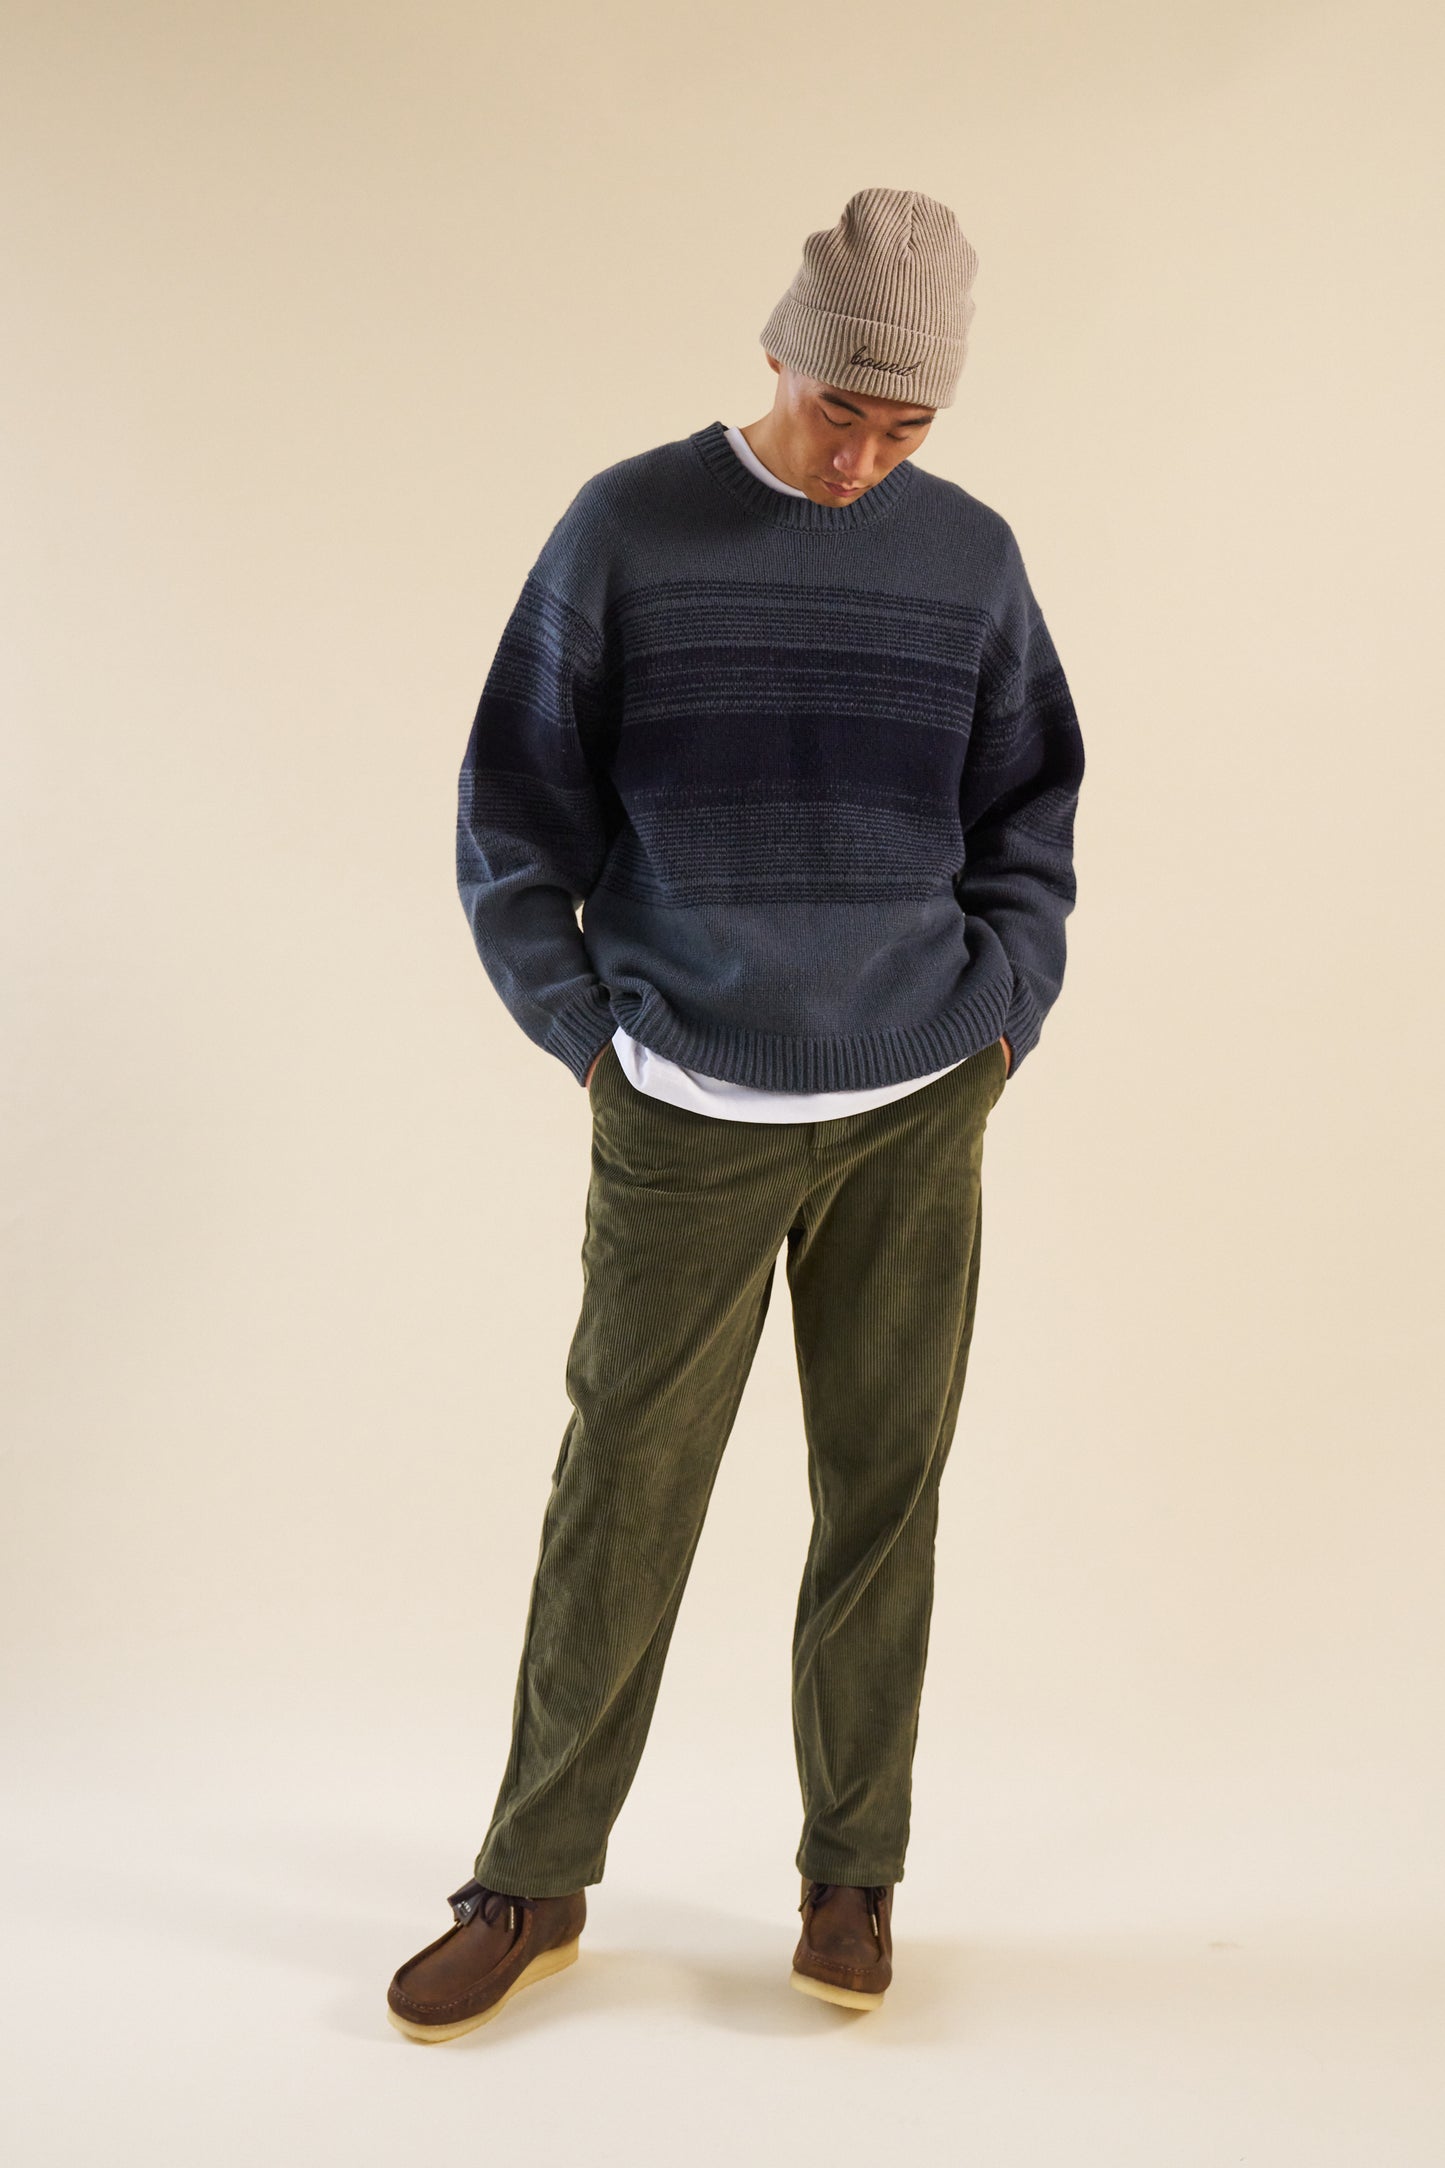 ARMY GREEN CORDUROY TROUSERS